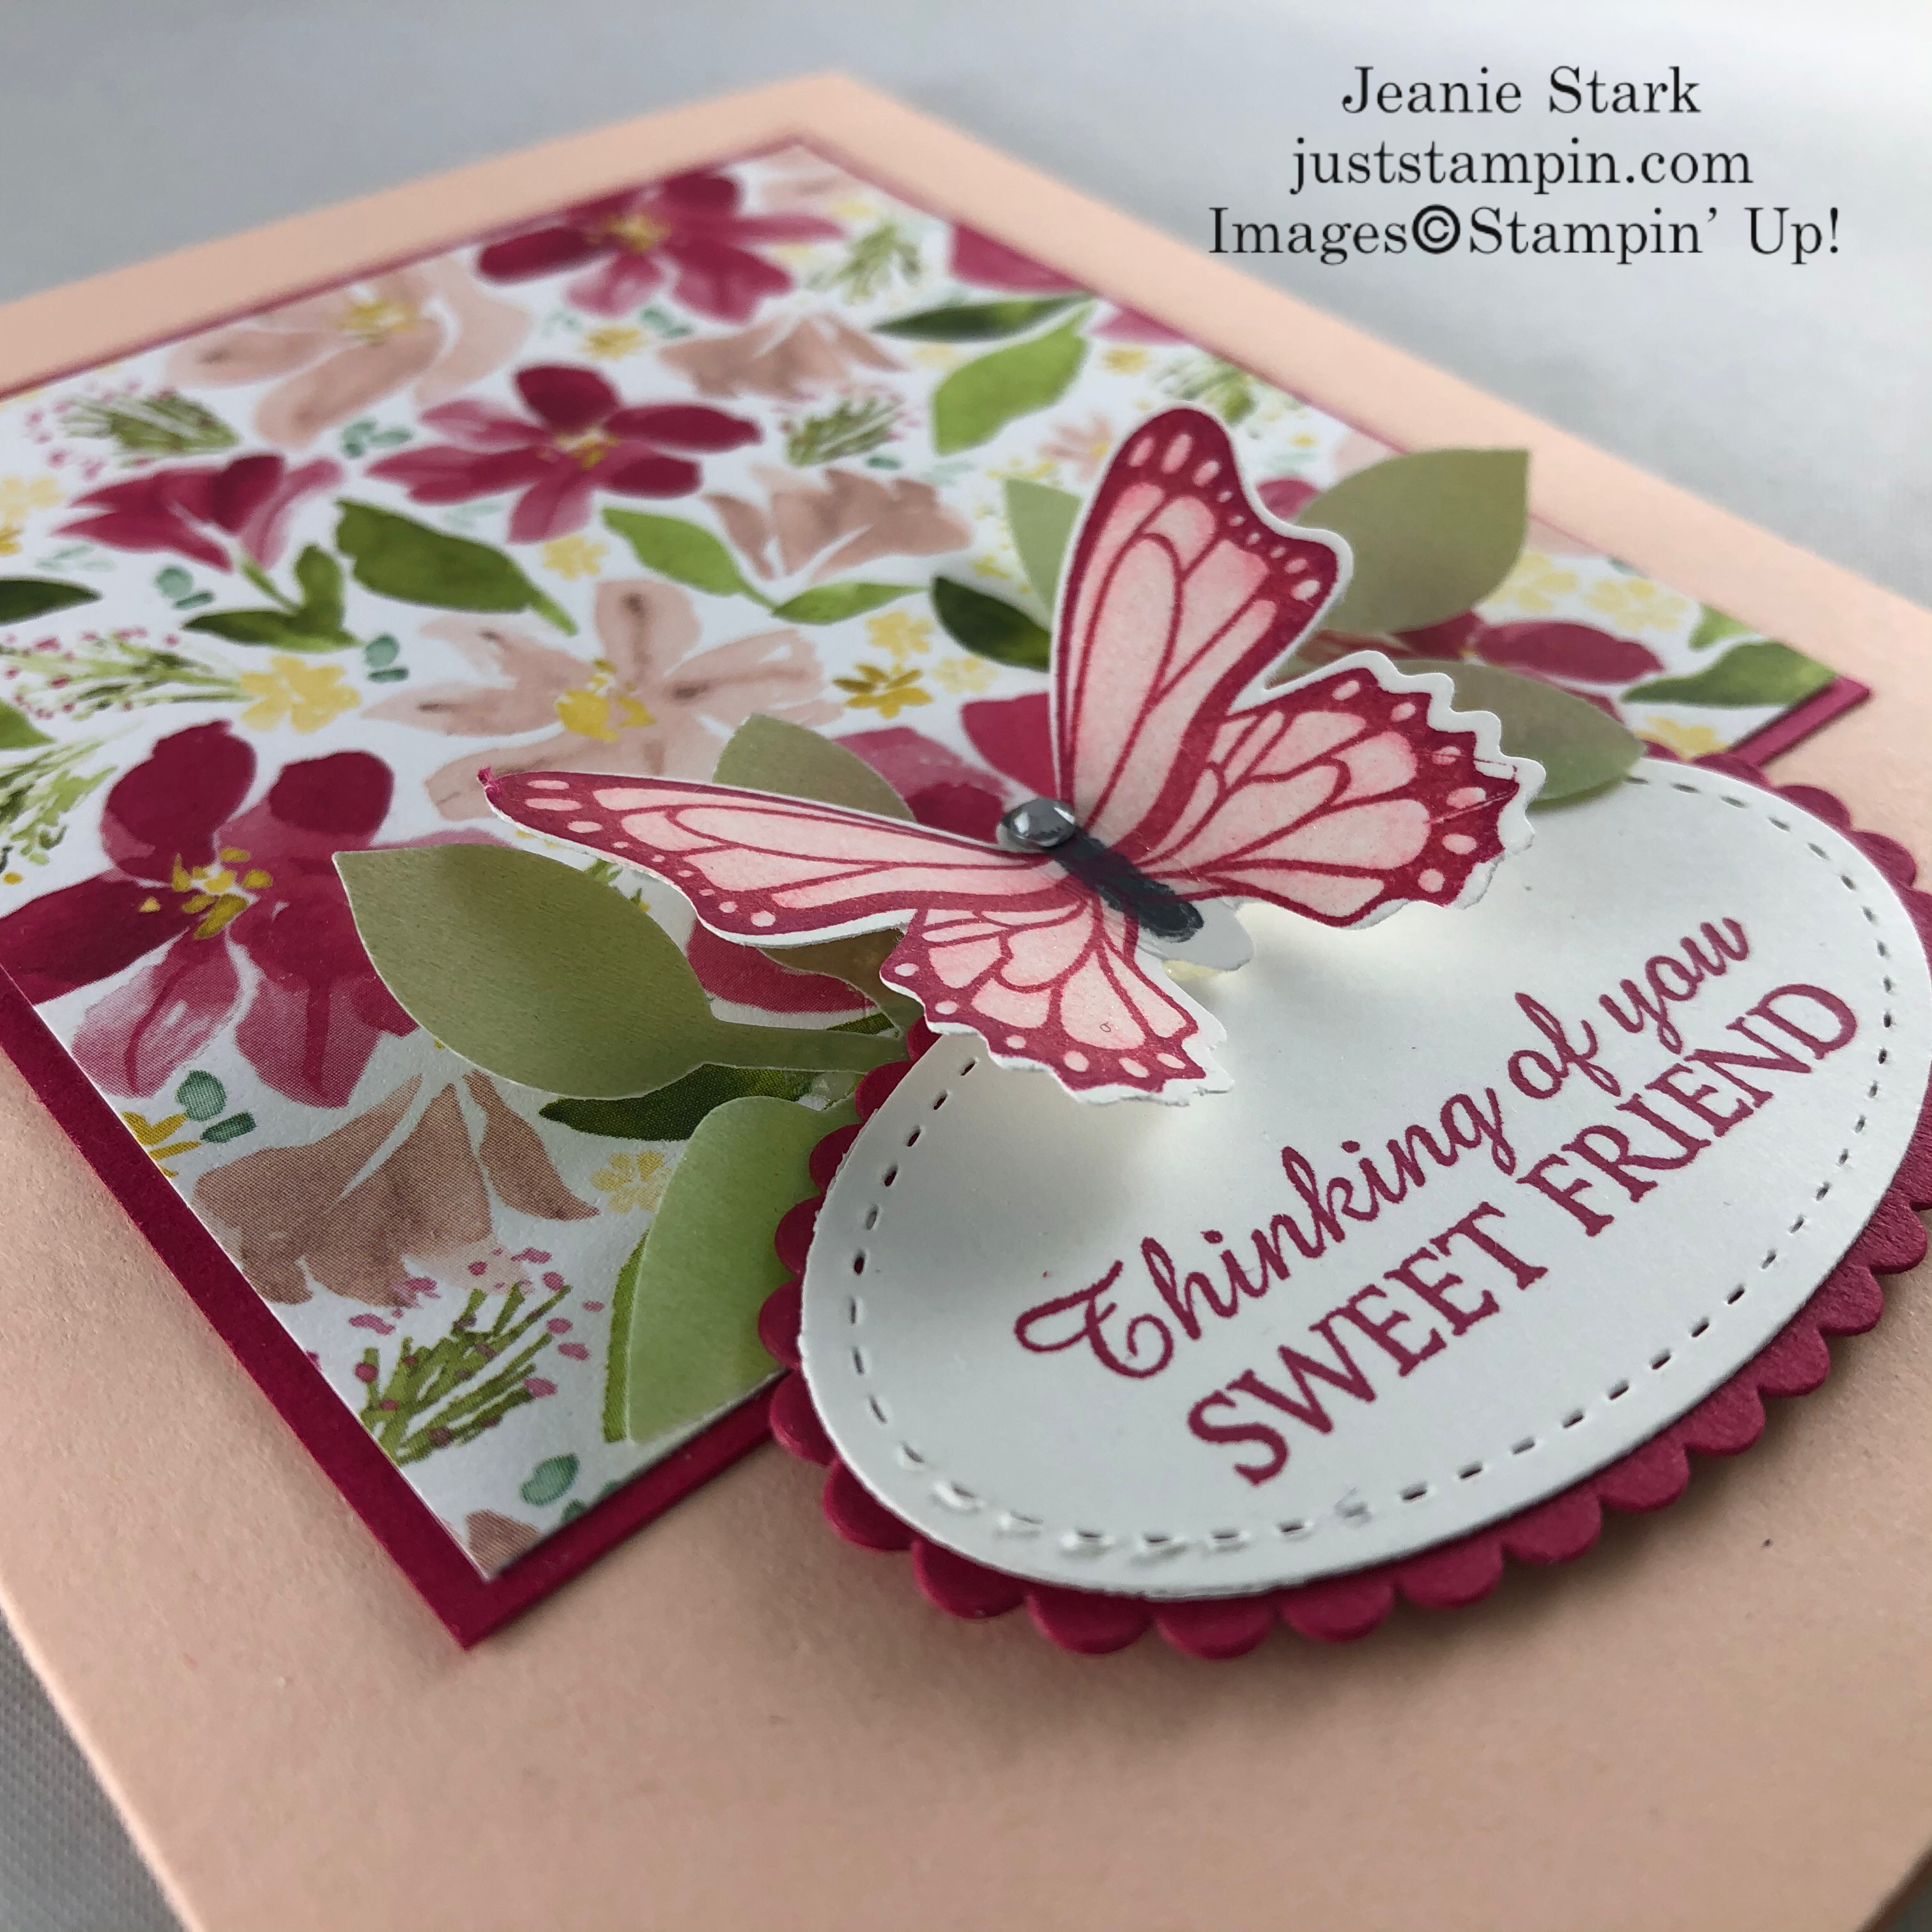 Stampin' Up! Best Dress Honey Bee thinking of you card idea for a friend - Jeanie Stark StampinUp